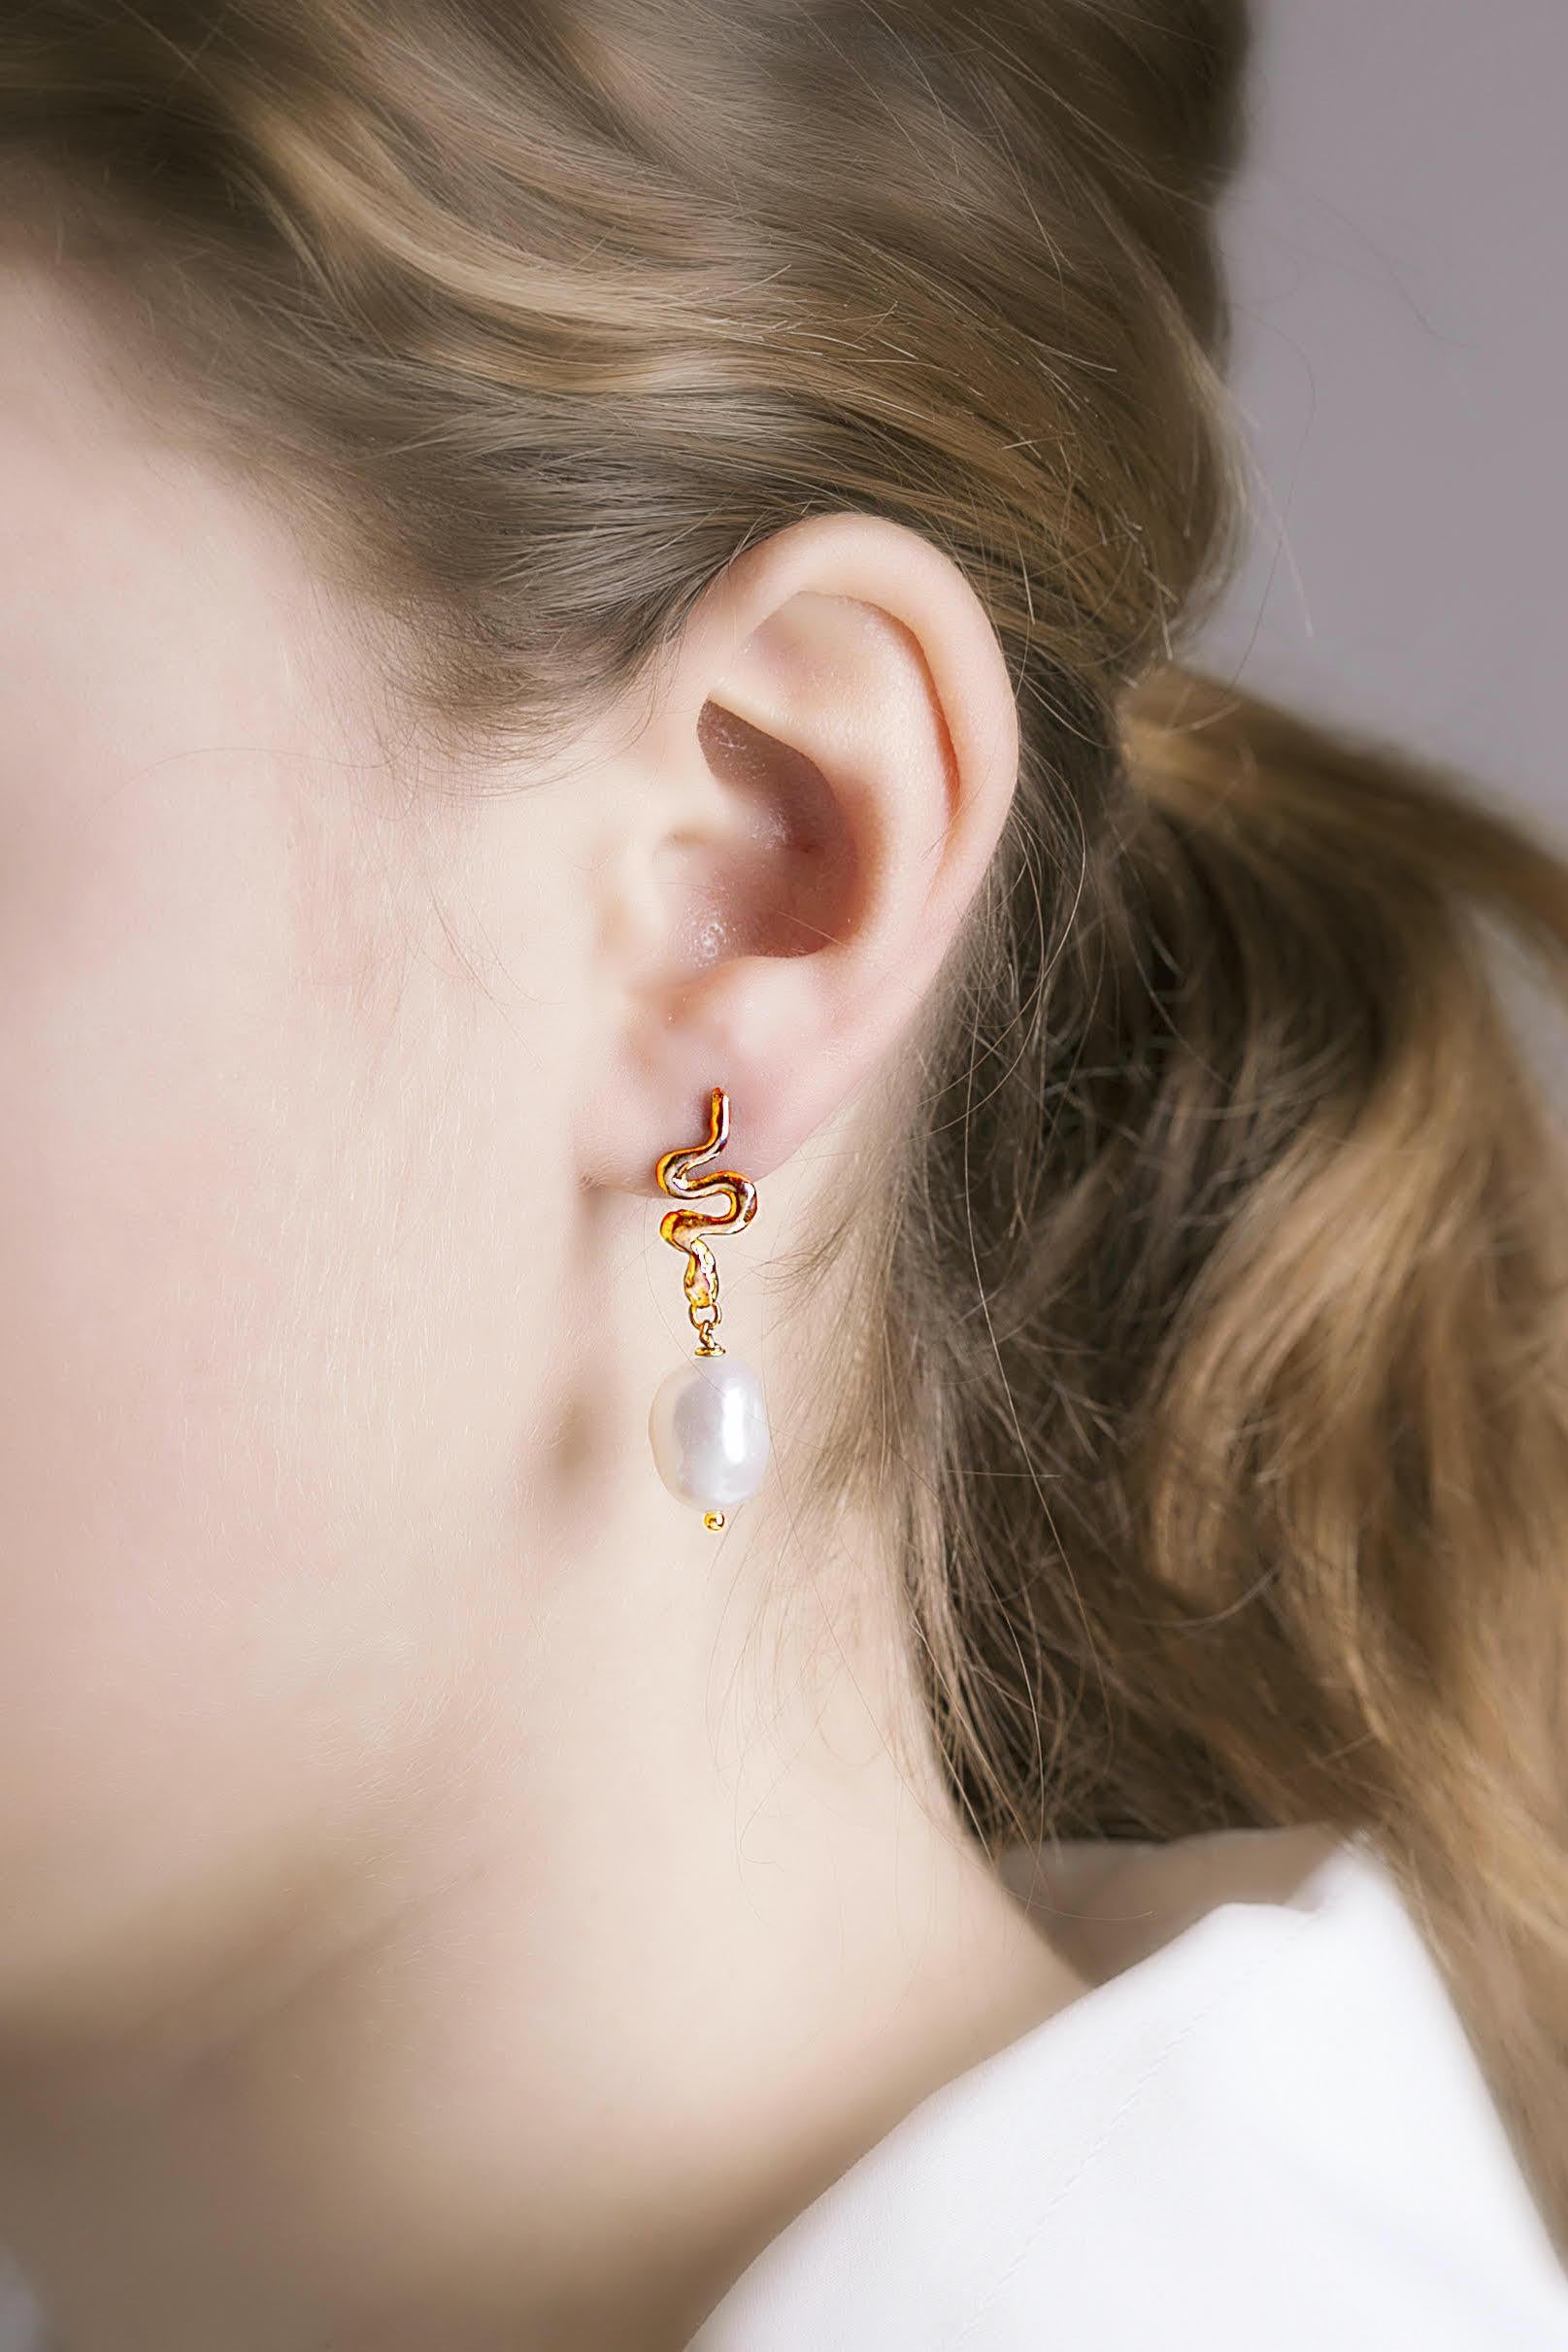 
Introducing Rossella Ugolini's exquisite Animalier Collection, these small pendant earrings are a true masterpiece of craftsmanship. Handcrafted in 18K Yellow Gold, they are adorned with lustrous White Oval Baroque Pearls that radiate elegance and